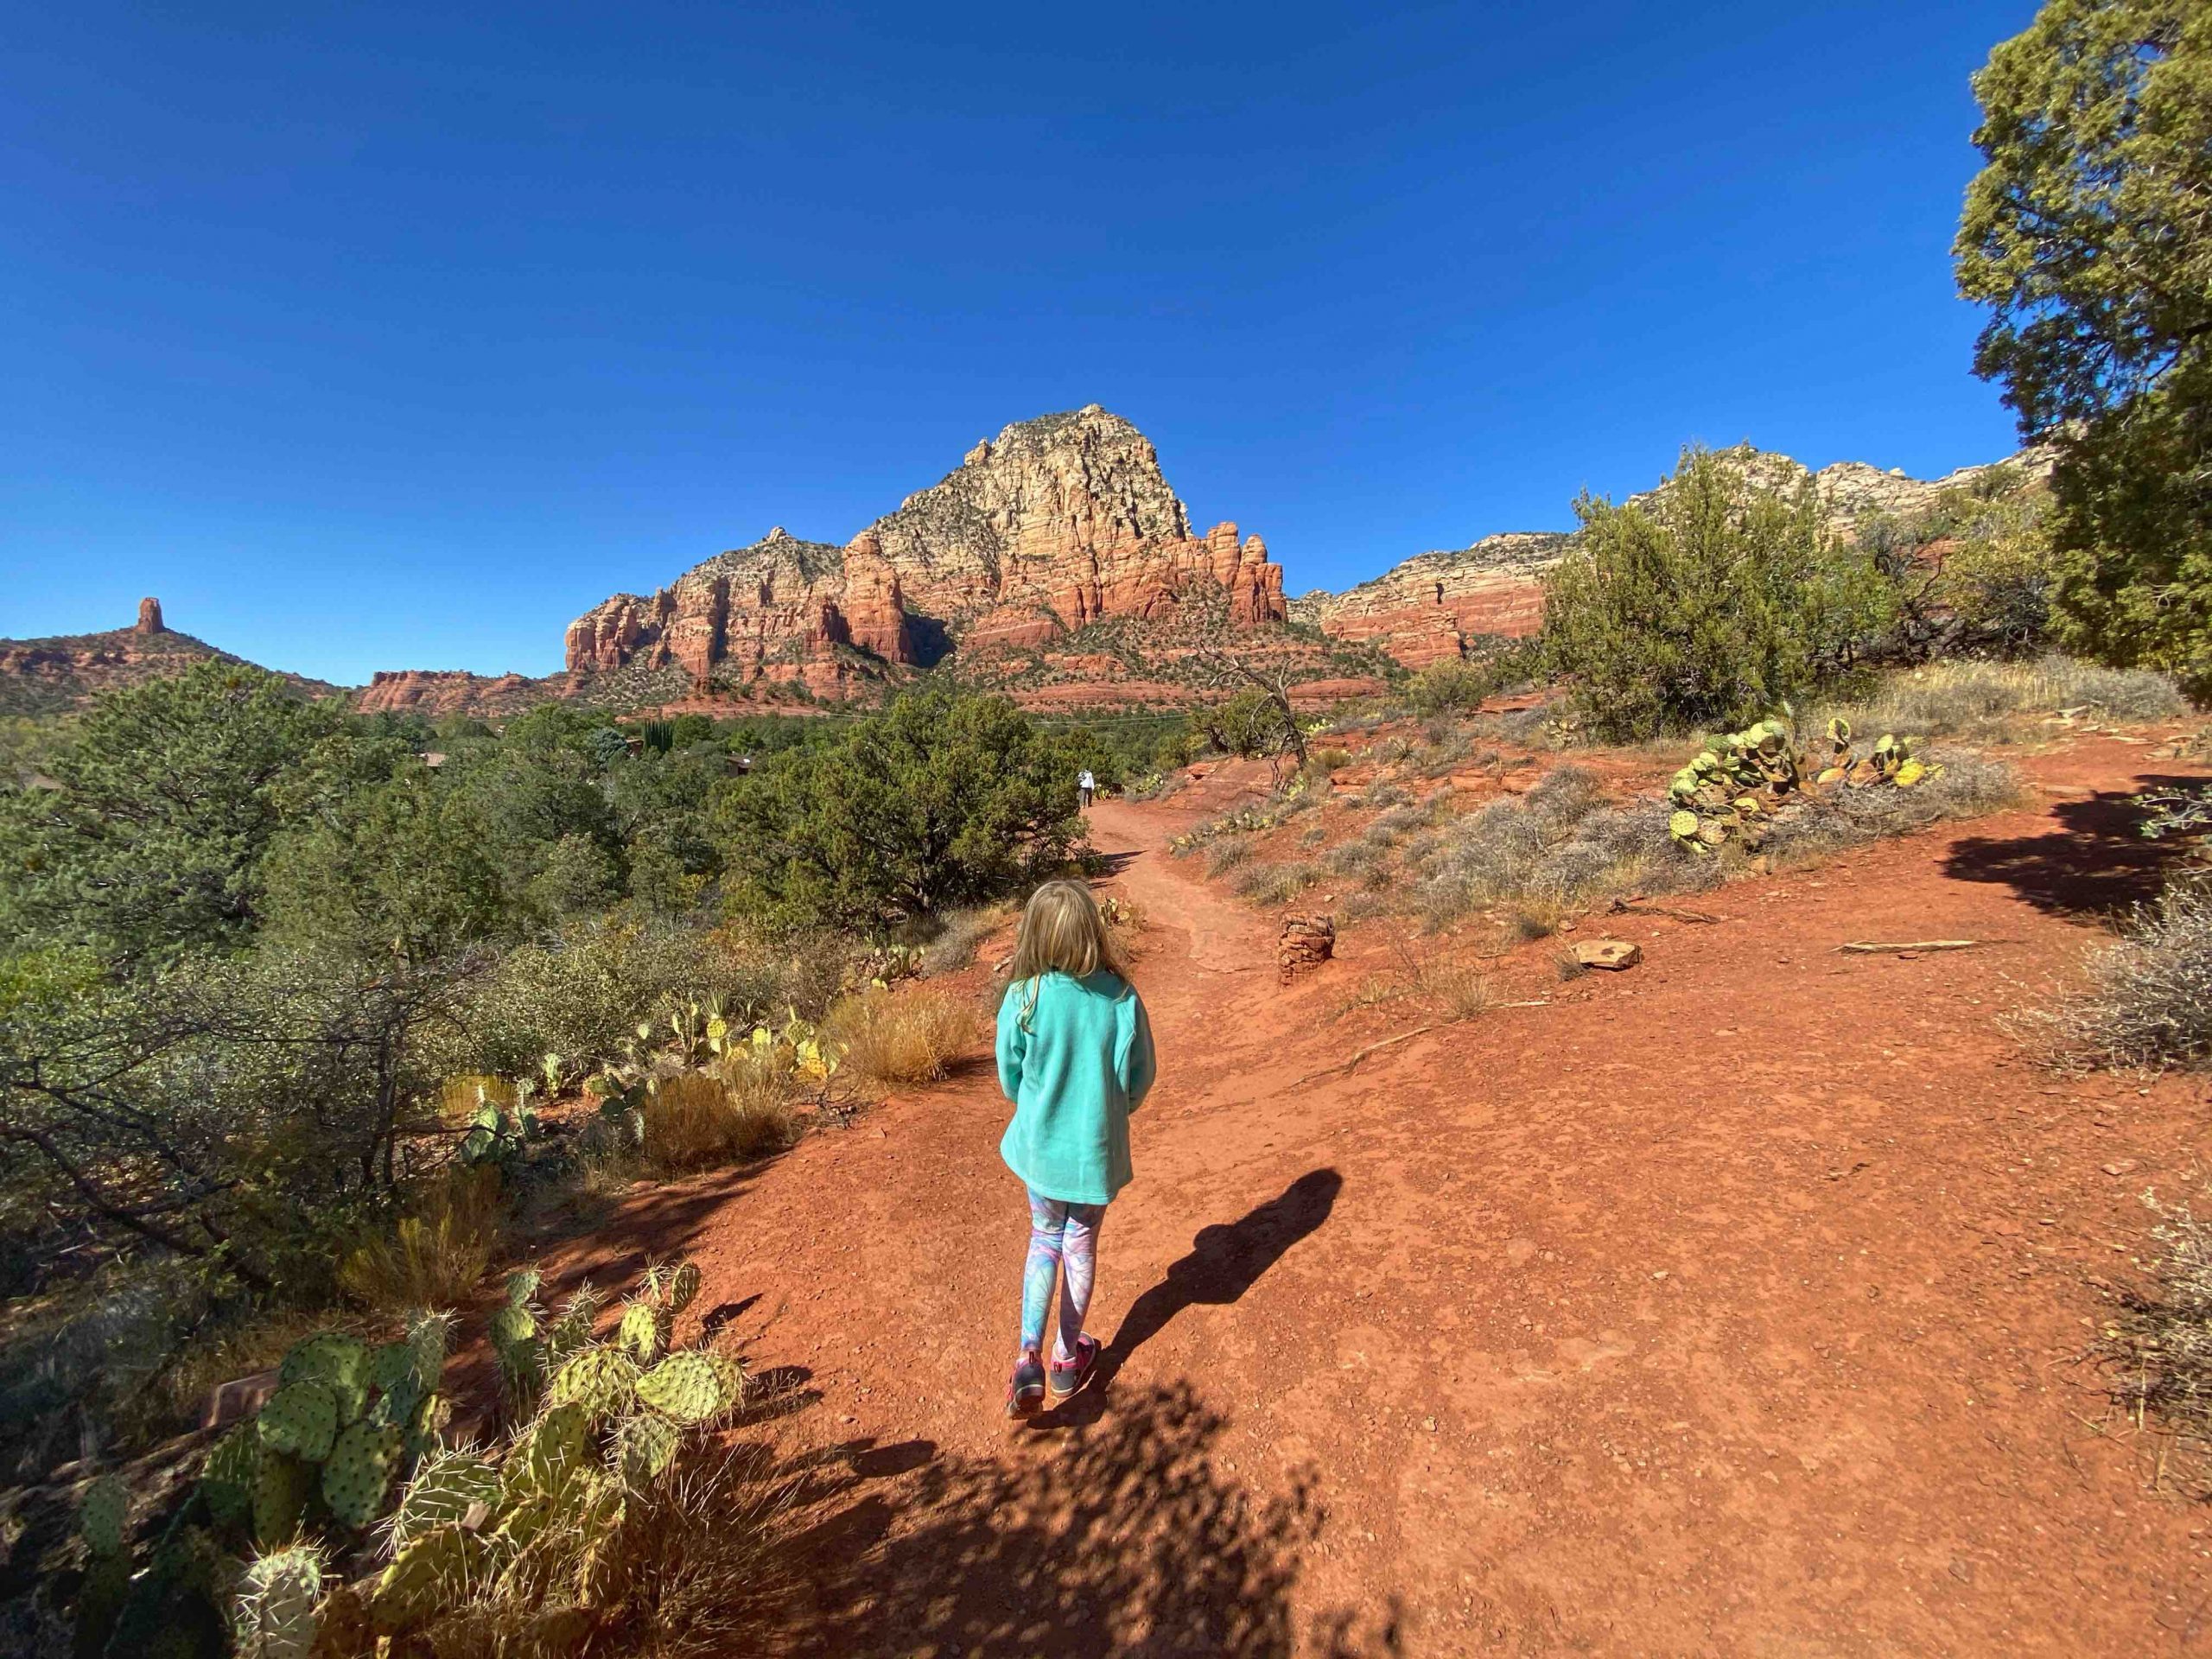 Child on a hike. Best hikes for kids cover